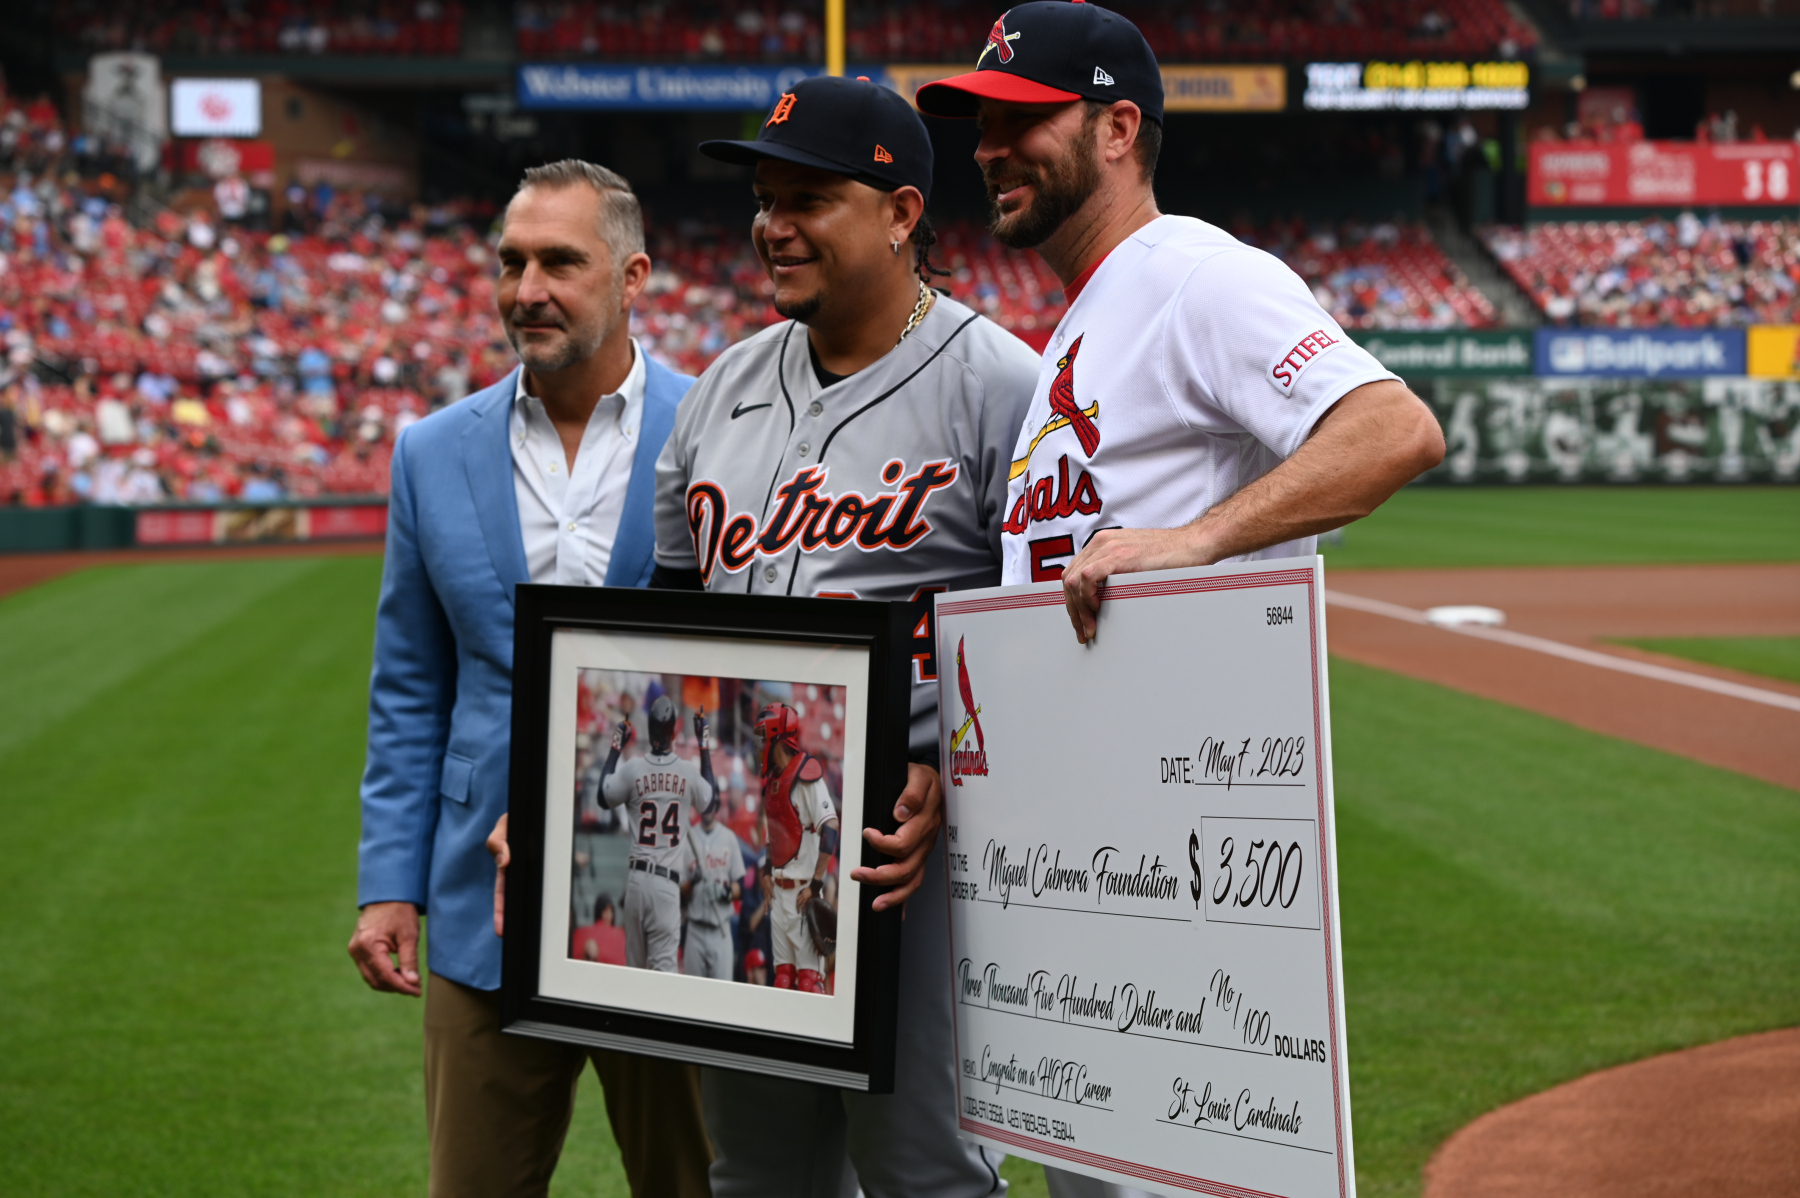 Teams Across the MLB Recognize Miquel Cabrera with Gifts in His